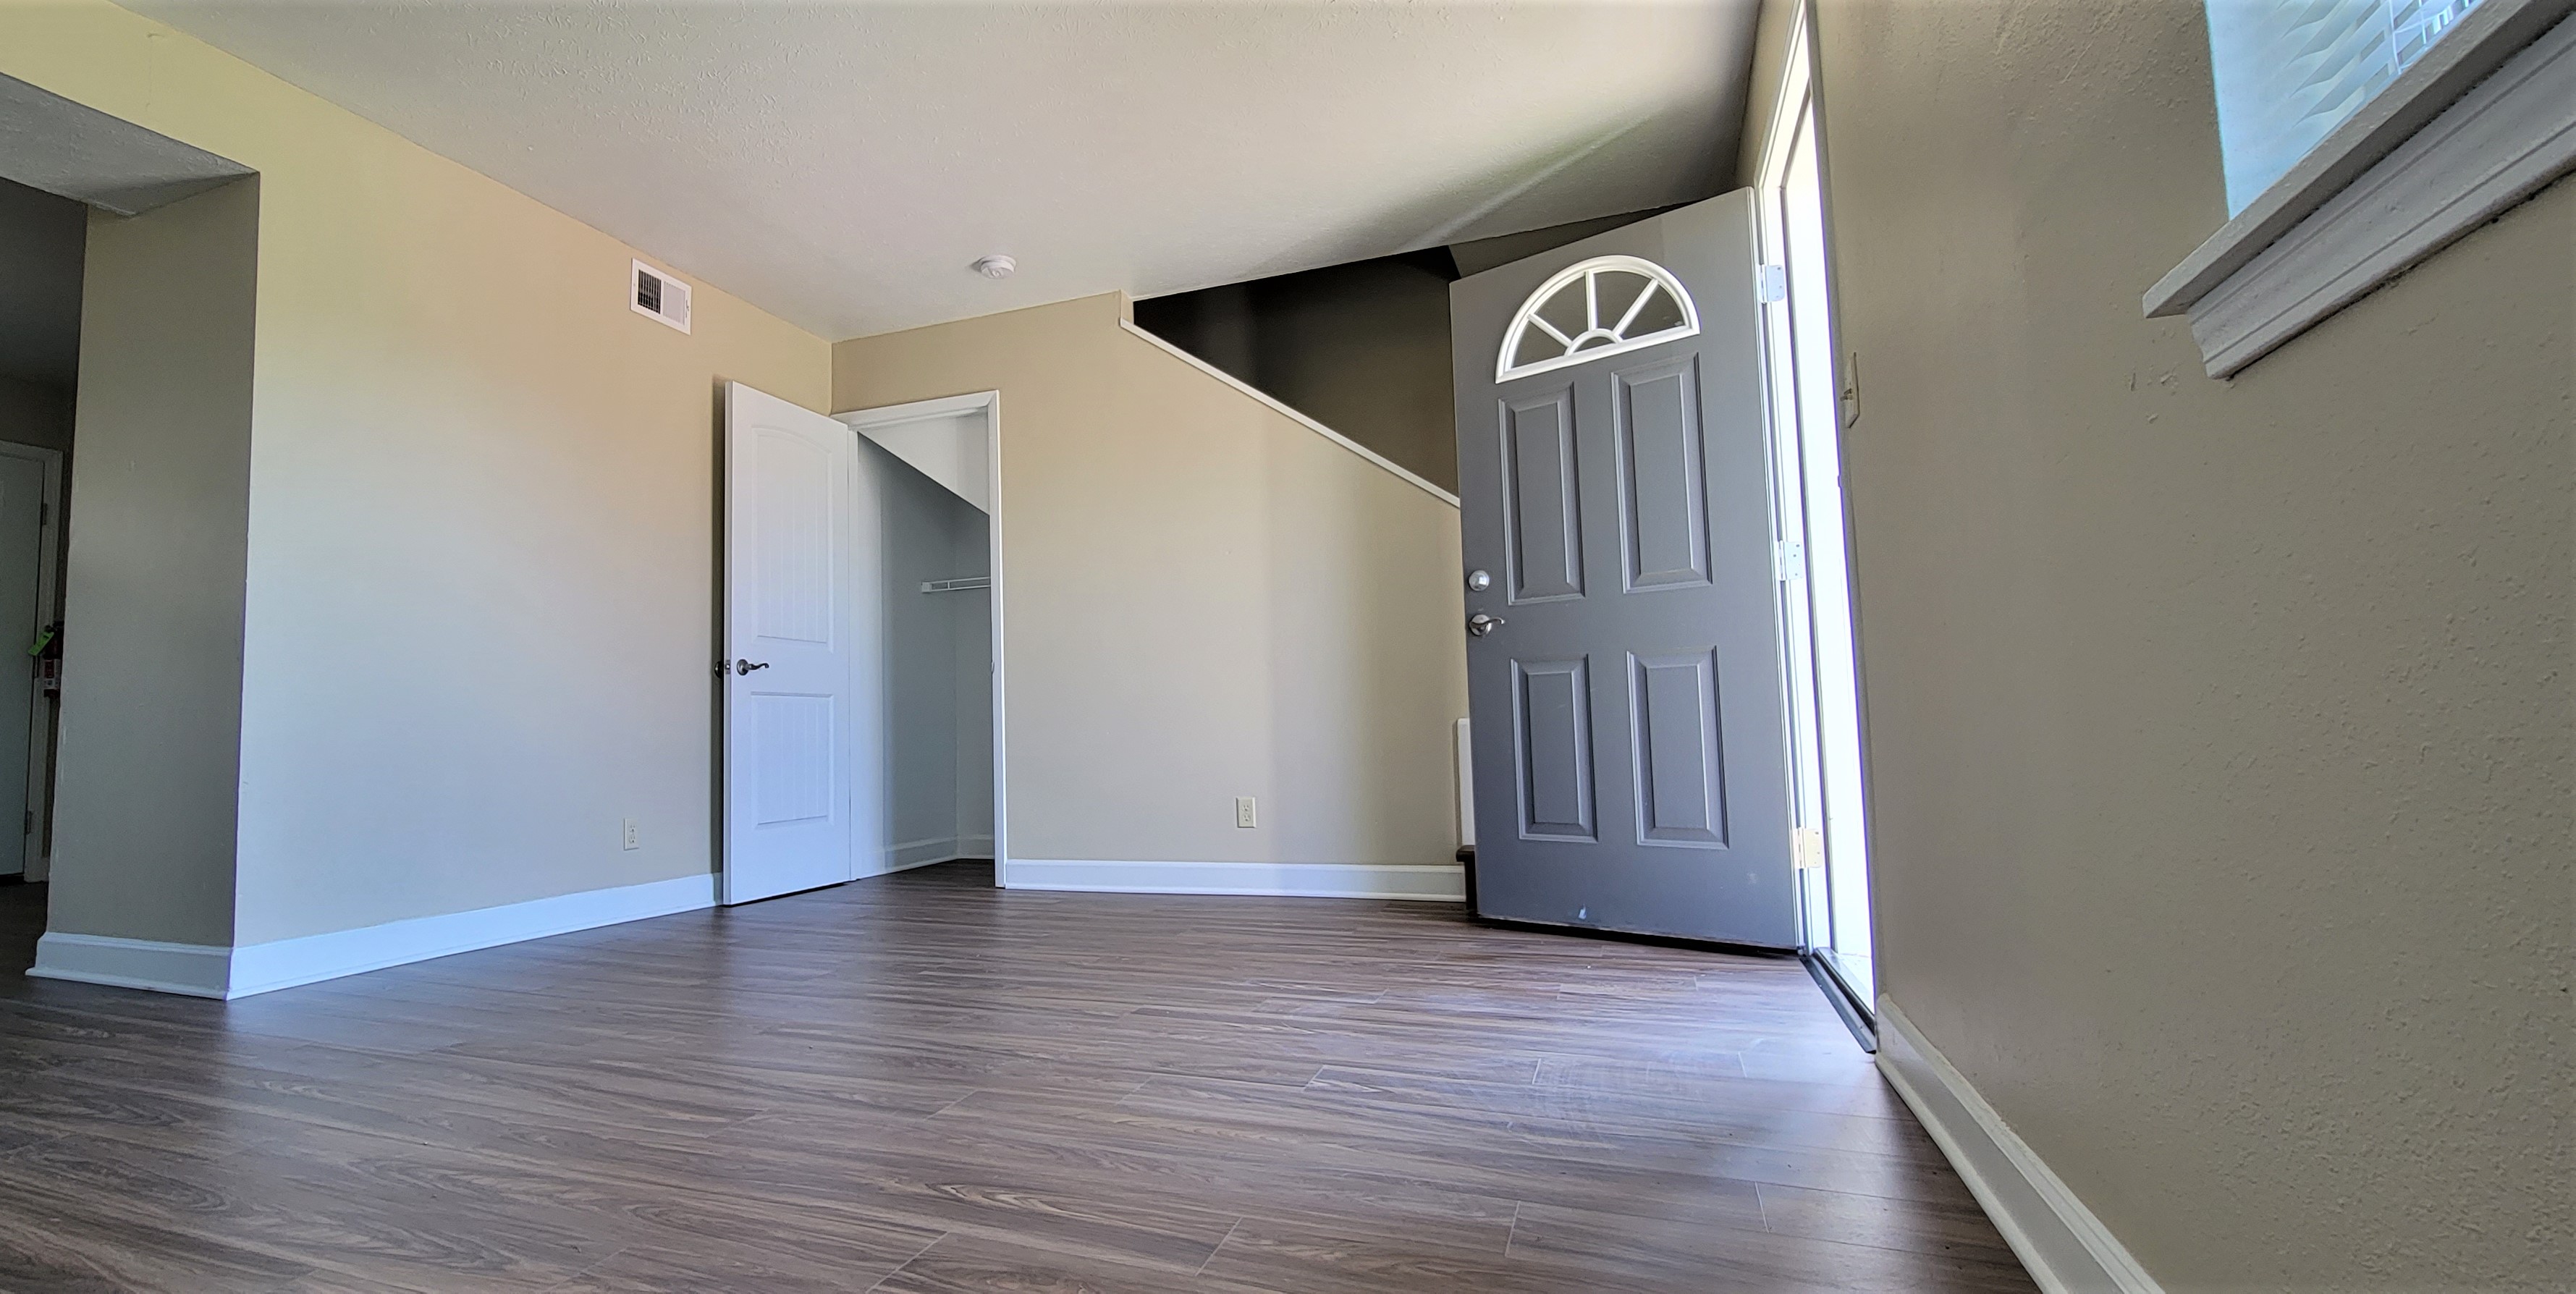 Inside one of the newly renovated Keystone Family Apartment Buildings. Fresh Tan Paint with White Trim and Gray Door.